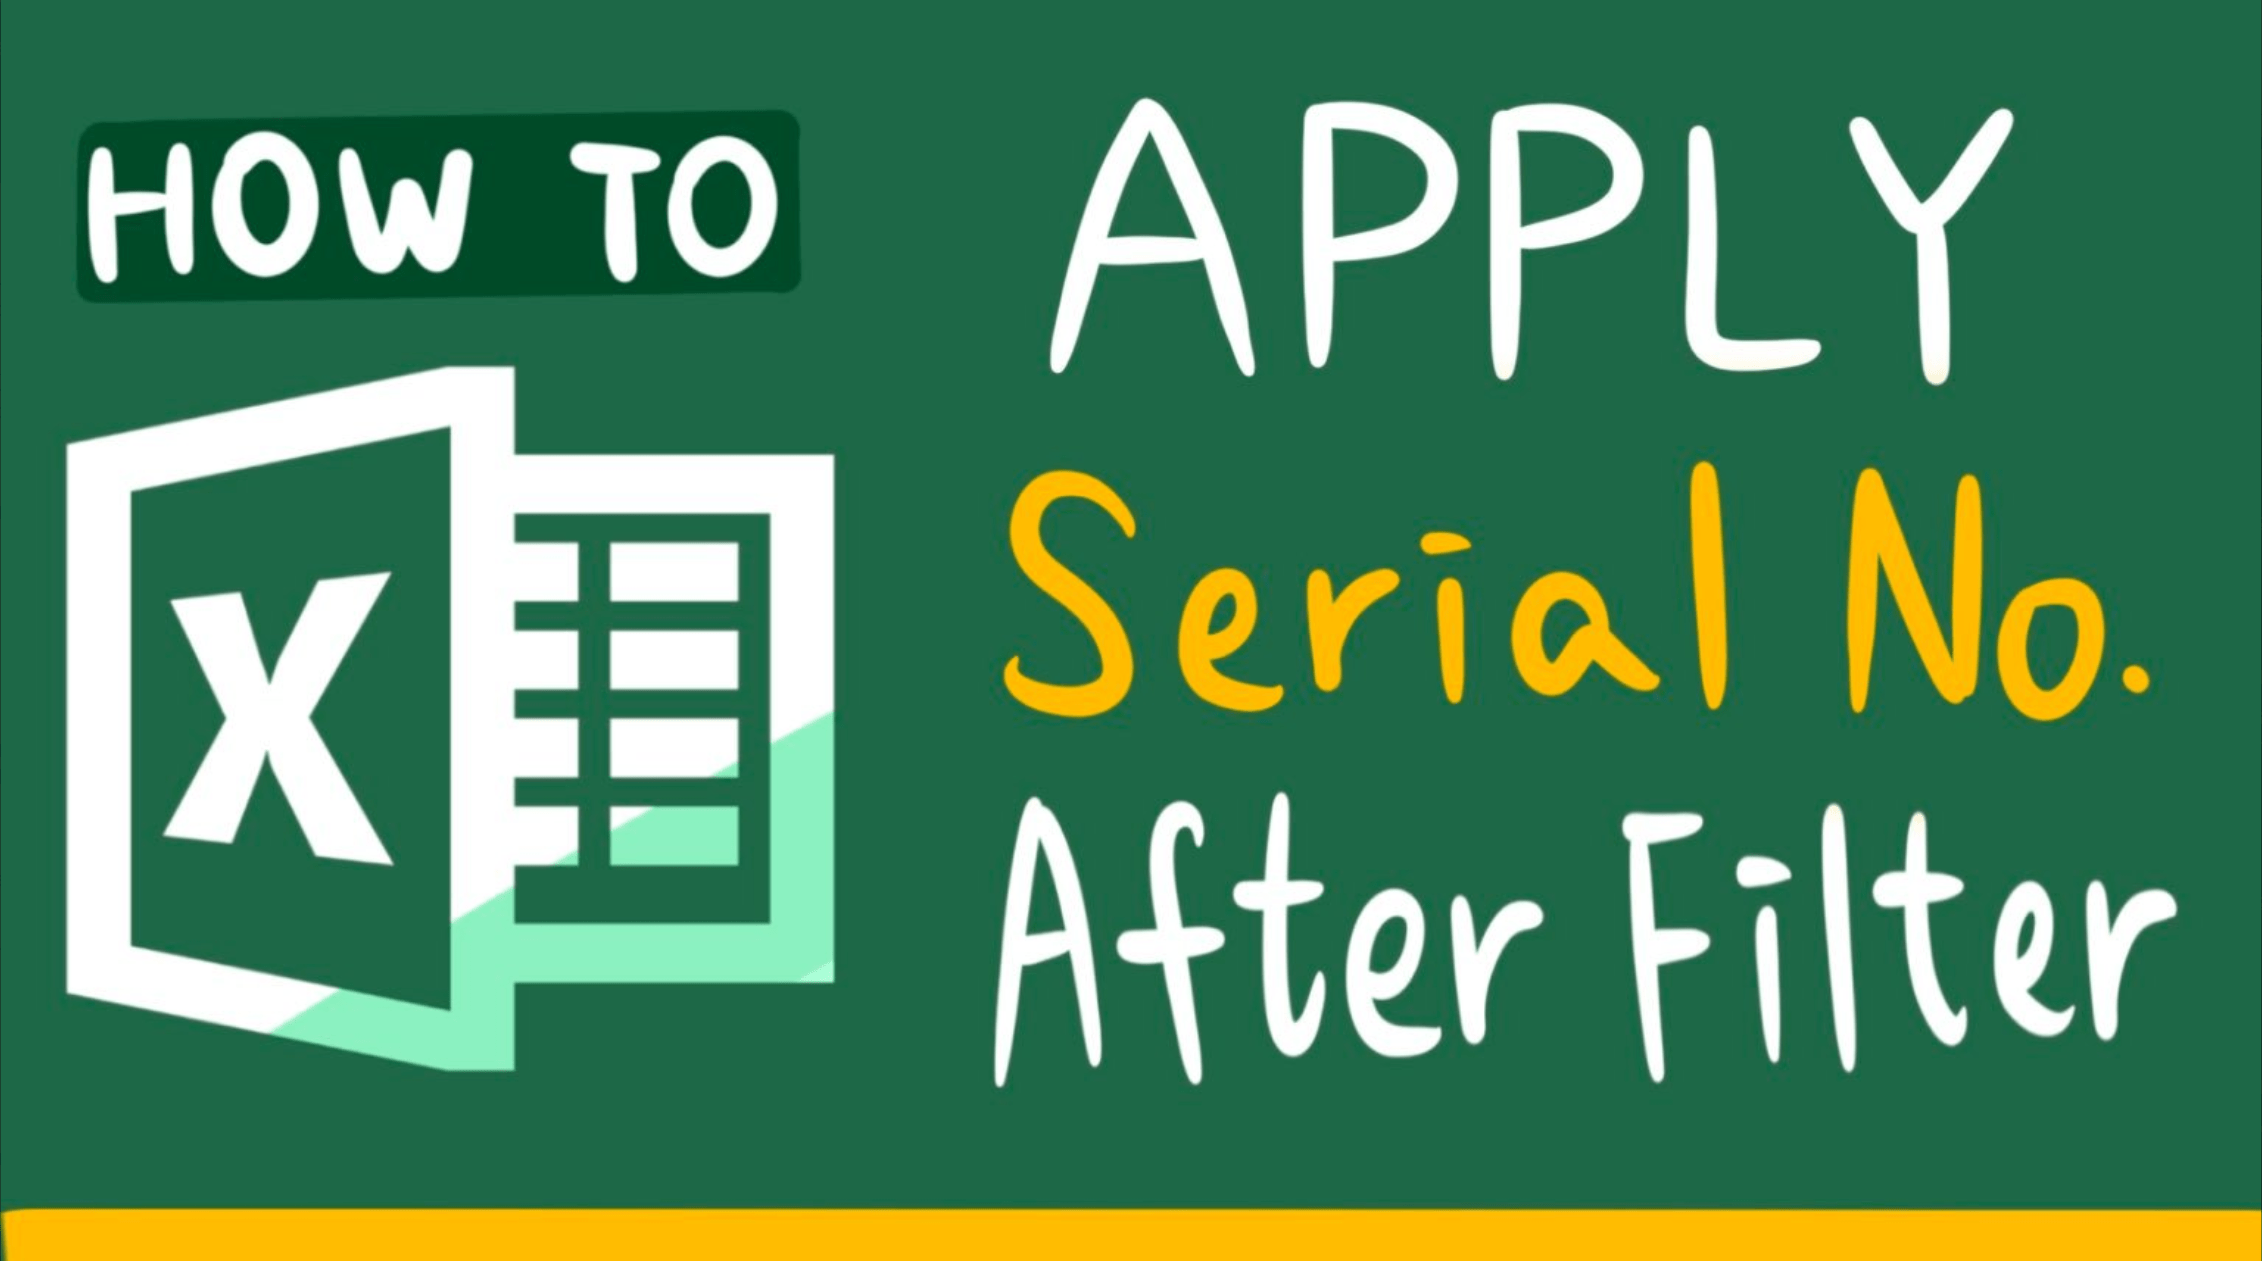 How to apply serial number after filter in Excel?